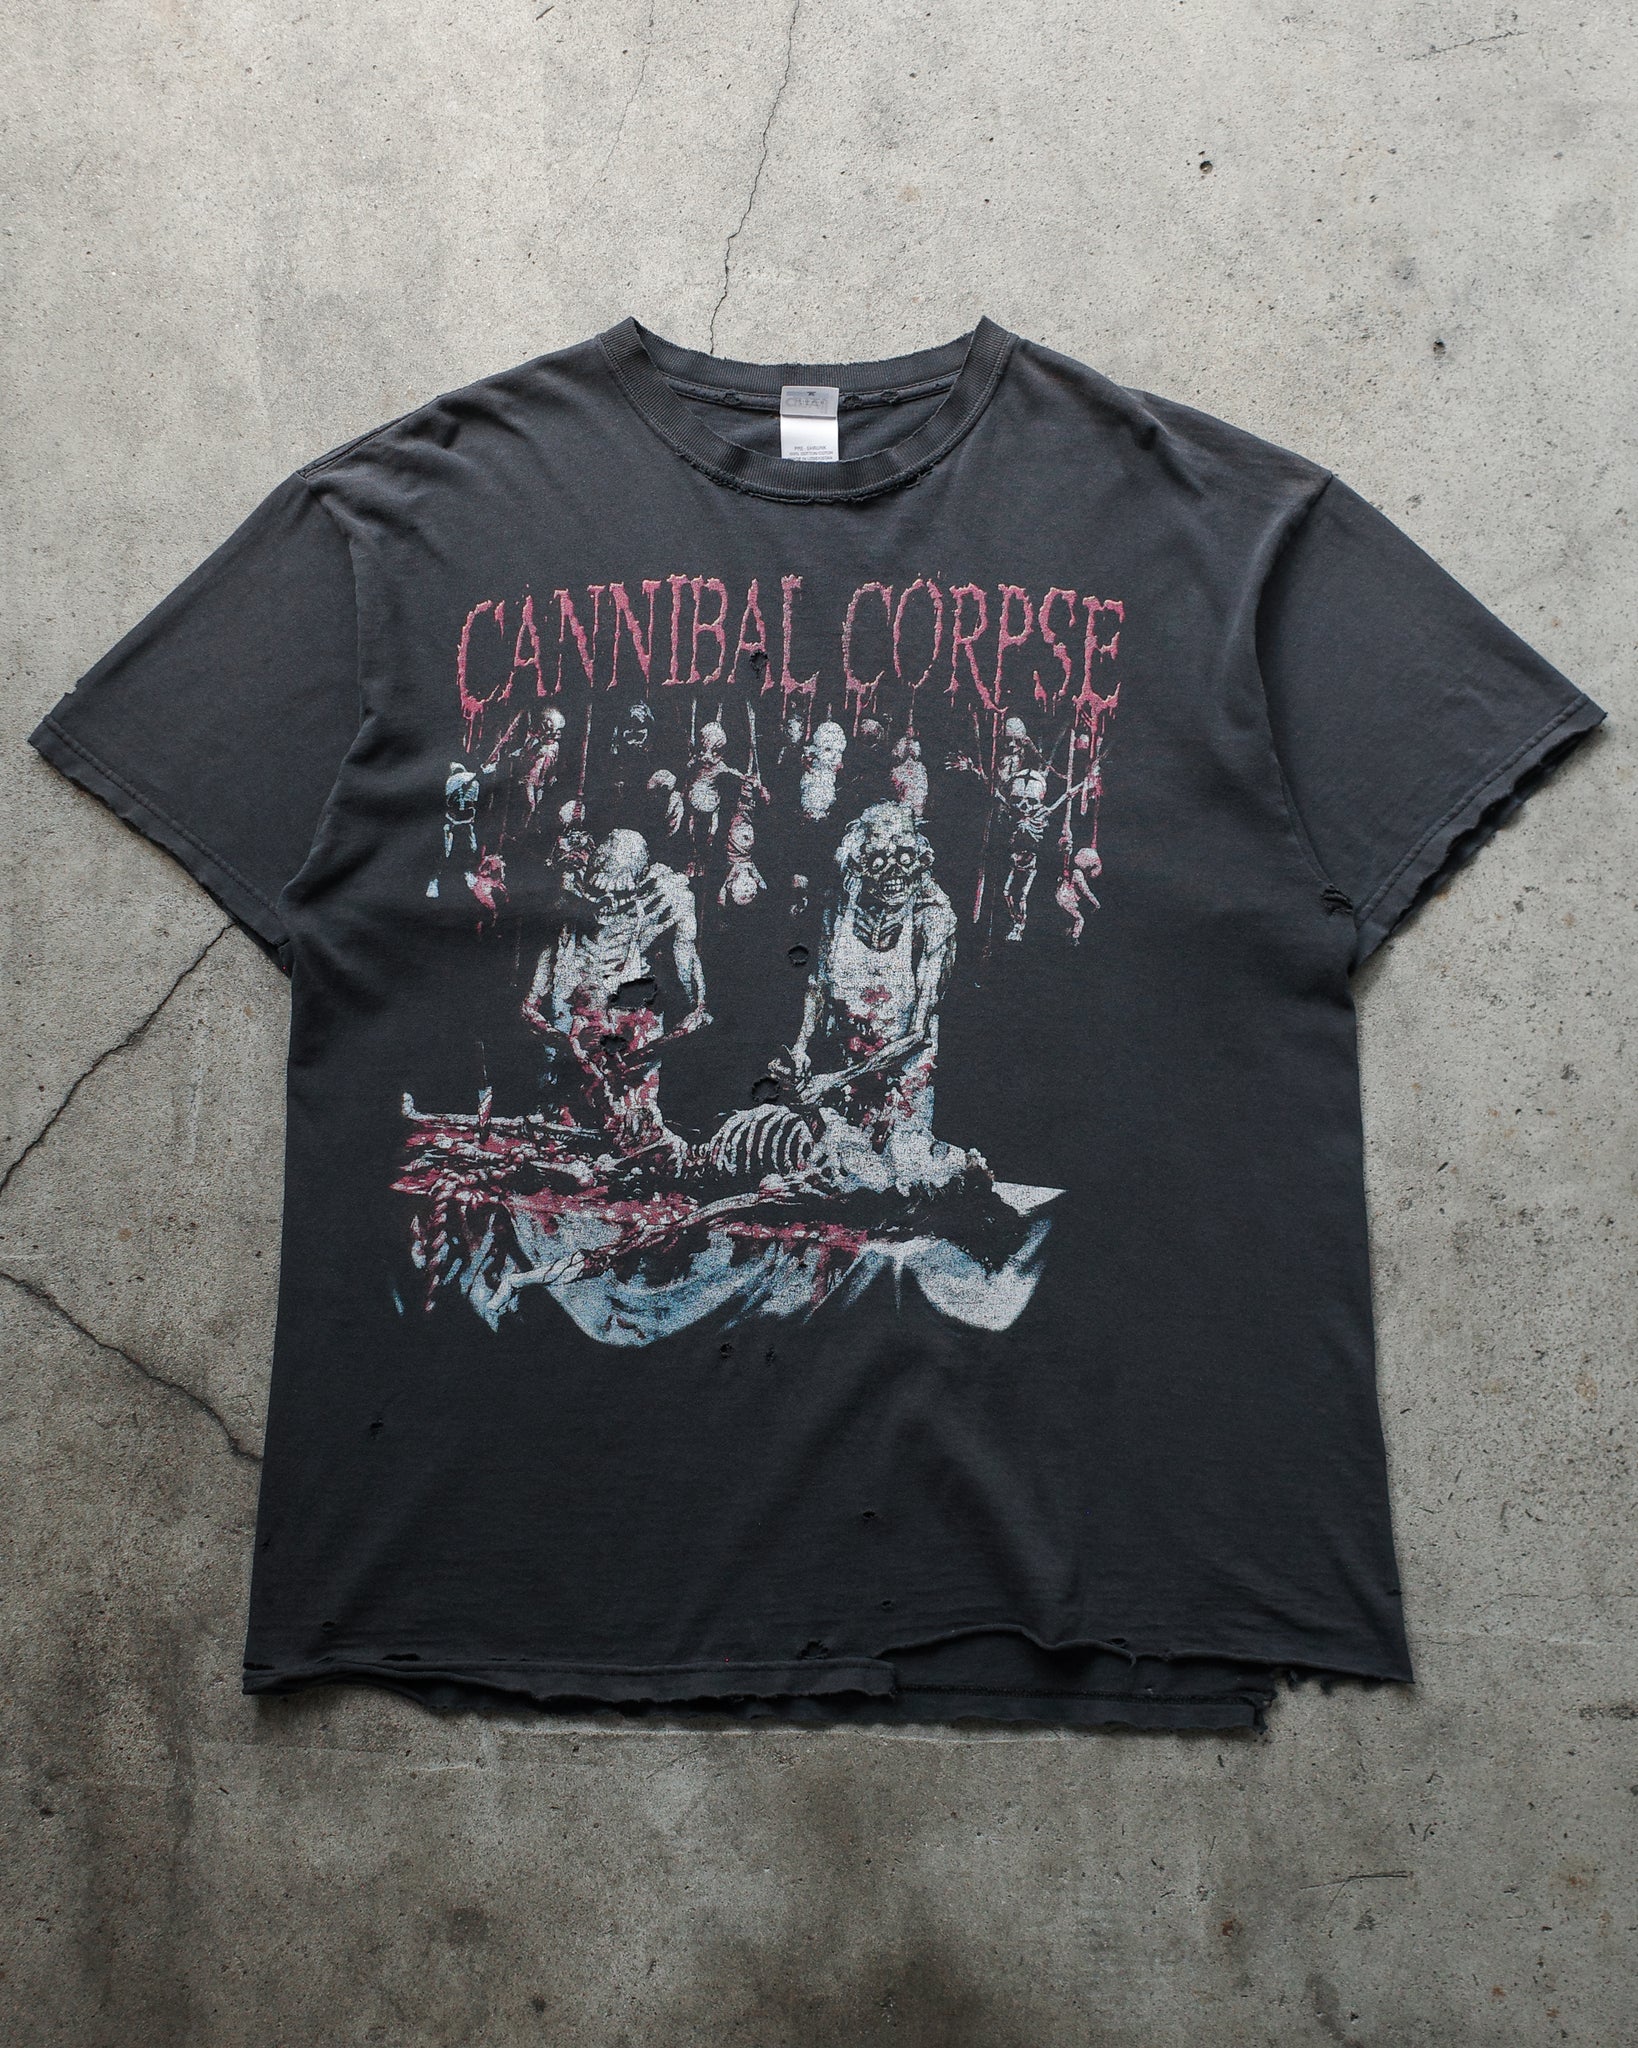 Early 2000s Cannibal Corpse "Butchered At Birth" Tee